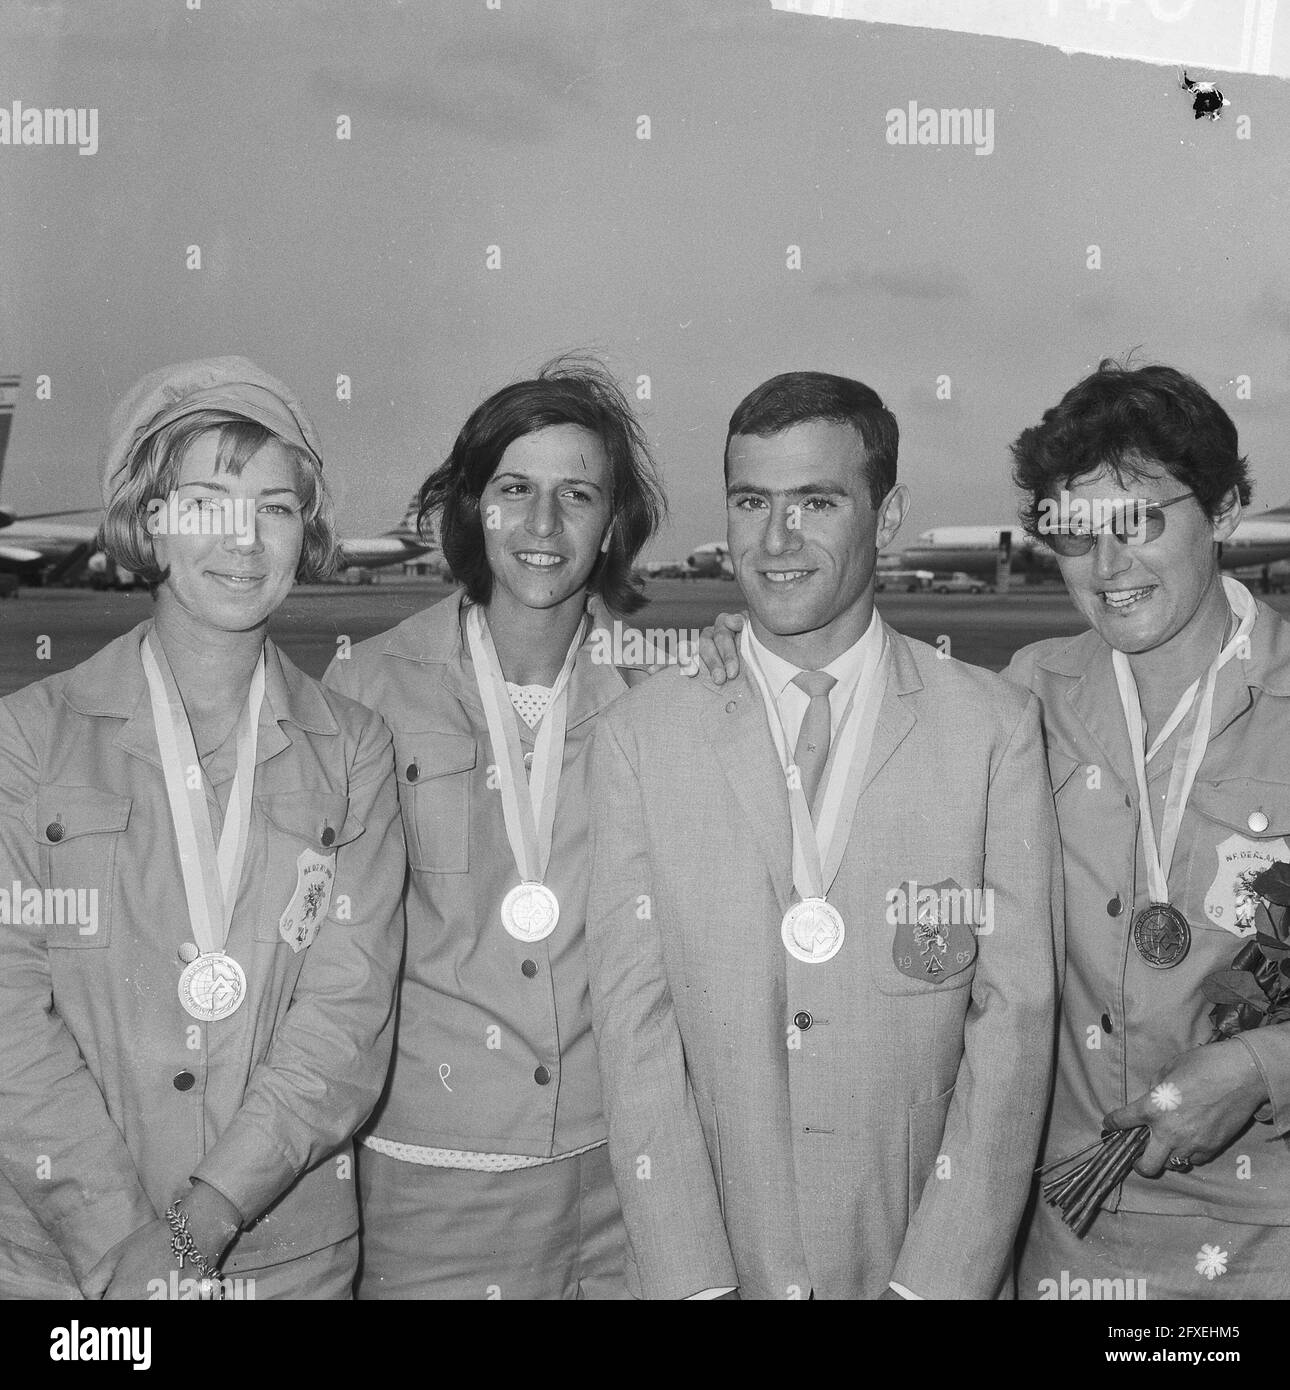 Back from Israel from the Maccabiade, from left to right Ineke van Wezel, Carry Piller, Rob Redeker and Selma Heijstek (all gold), September 5, 1965, arrivals, The Netherlands, 20th century press agency photo, news to remember, documentary, historic photography 1945-1990, visual stories, human history of the Twentieth Century, capturing moments in time Stock Photo